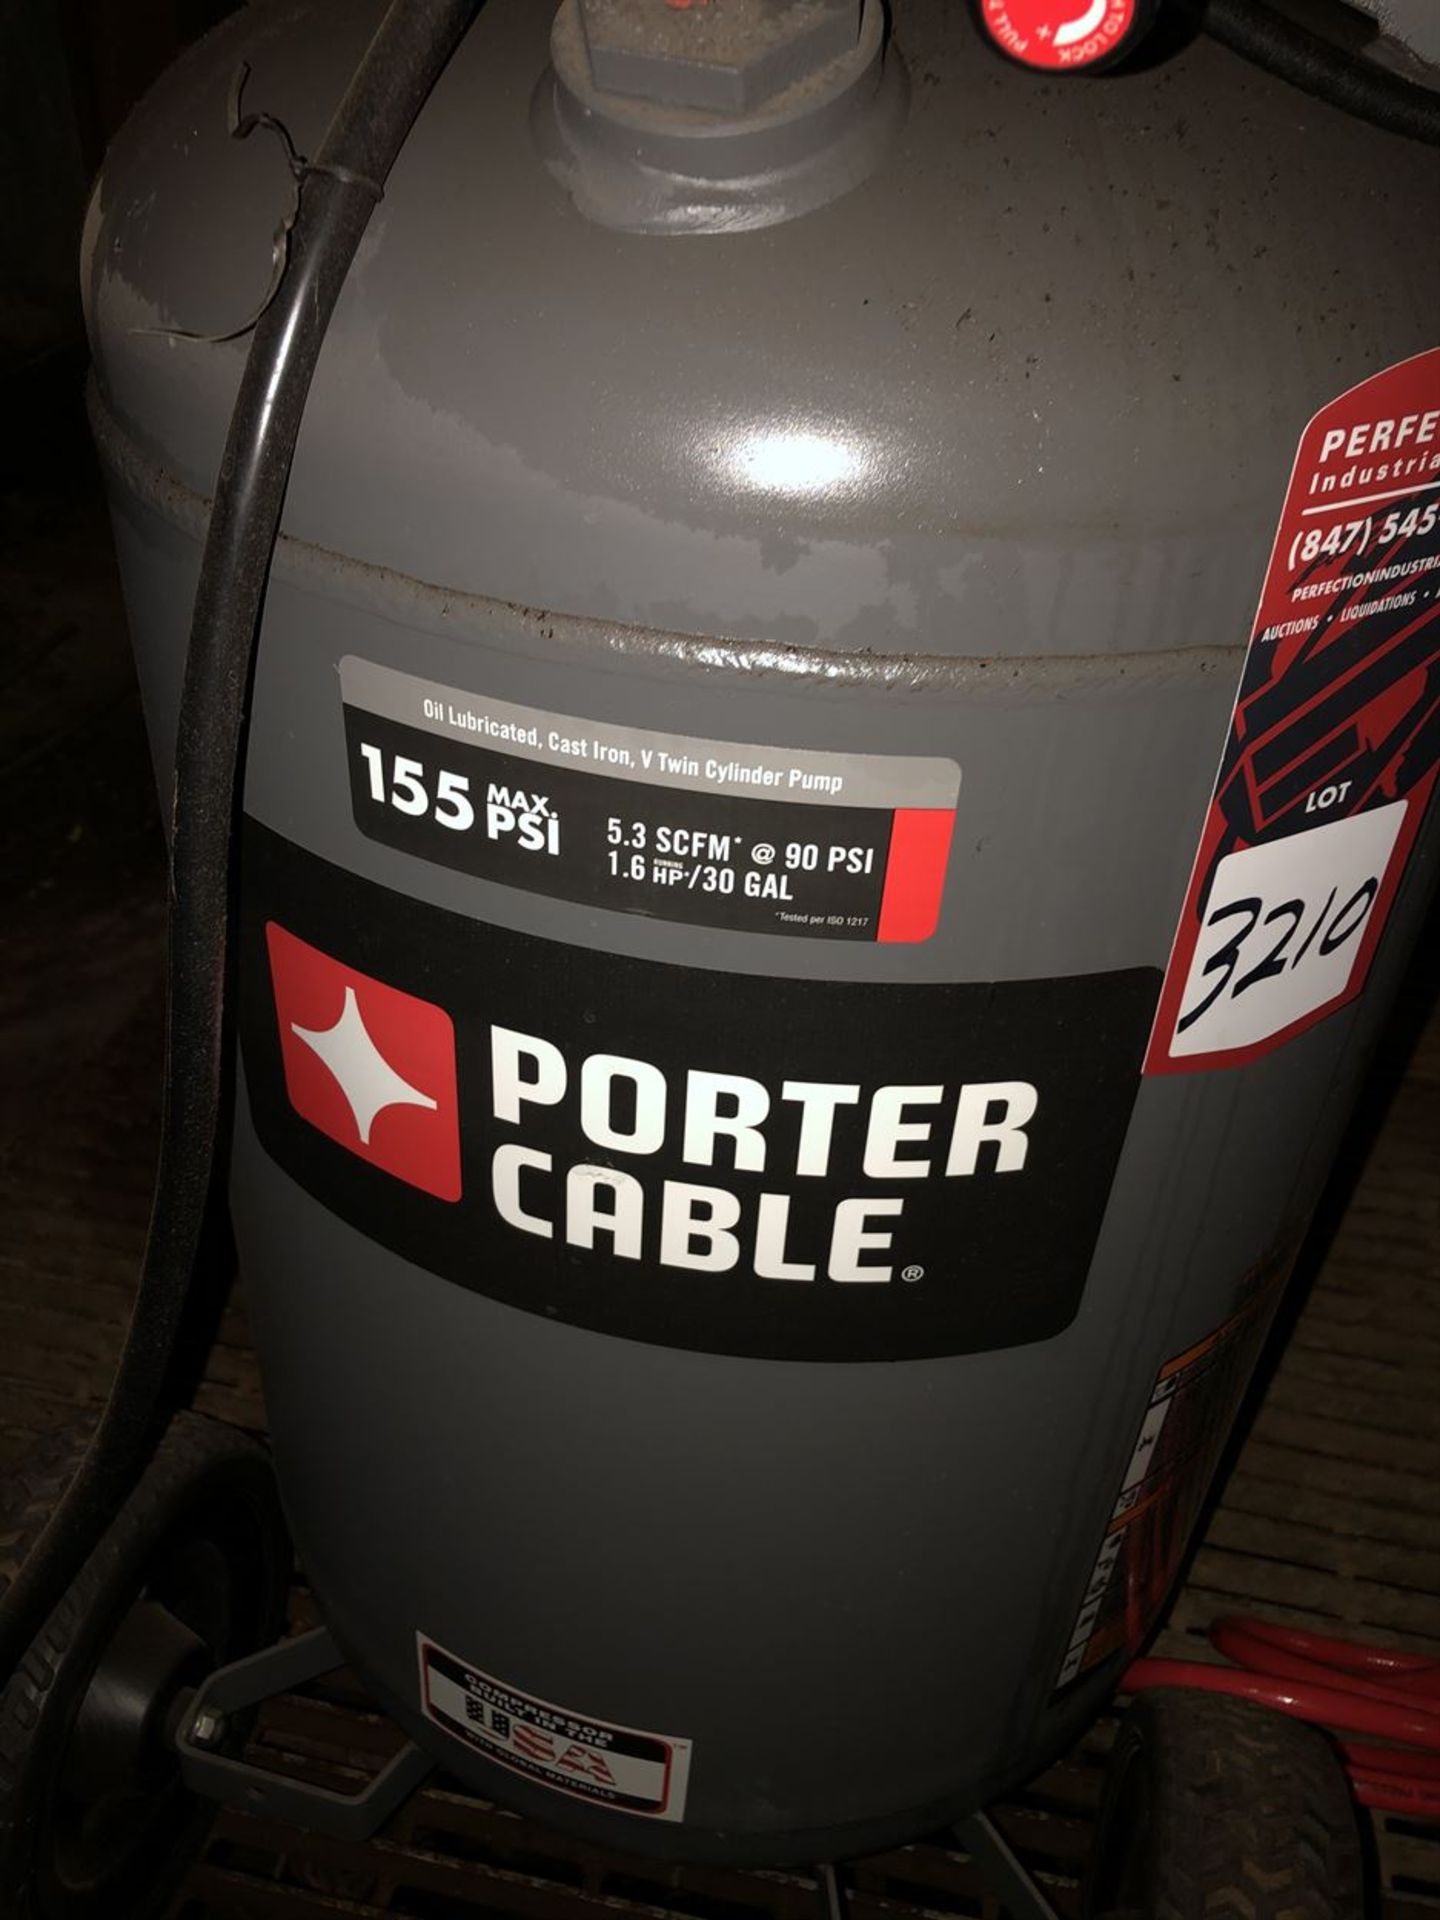 PORTER CABLE PXCM301 30 Gallon 1.6 HP Air Compressor, 90 PSI, Single Phase (Location: - Image 2 of 3